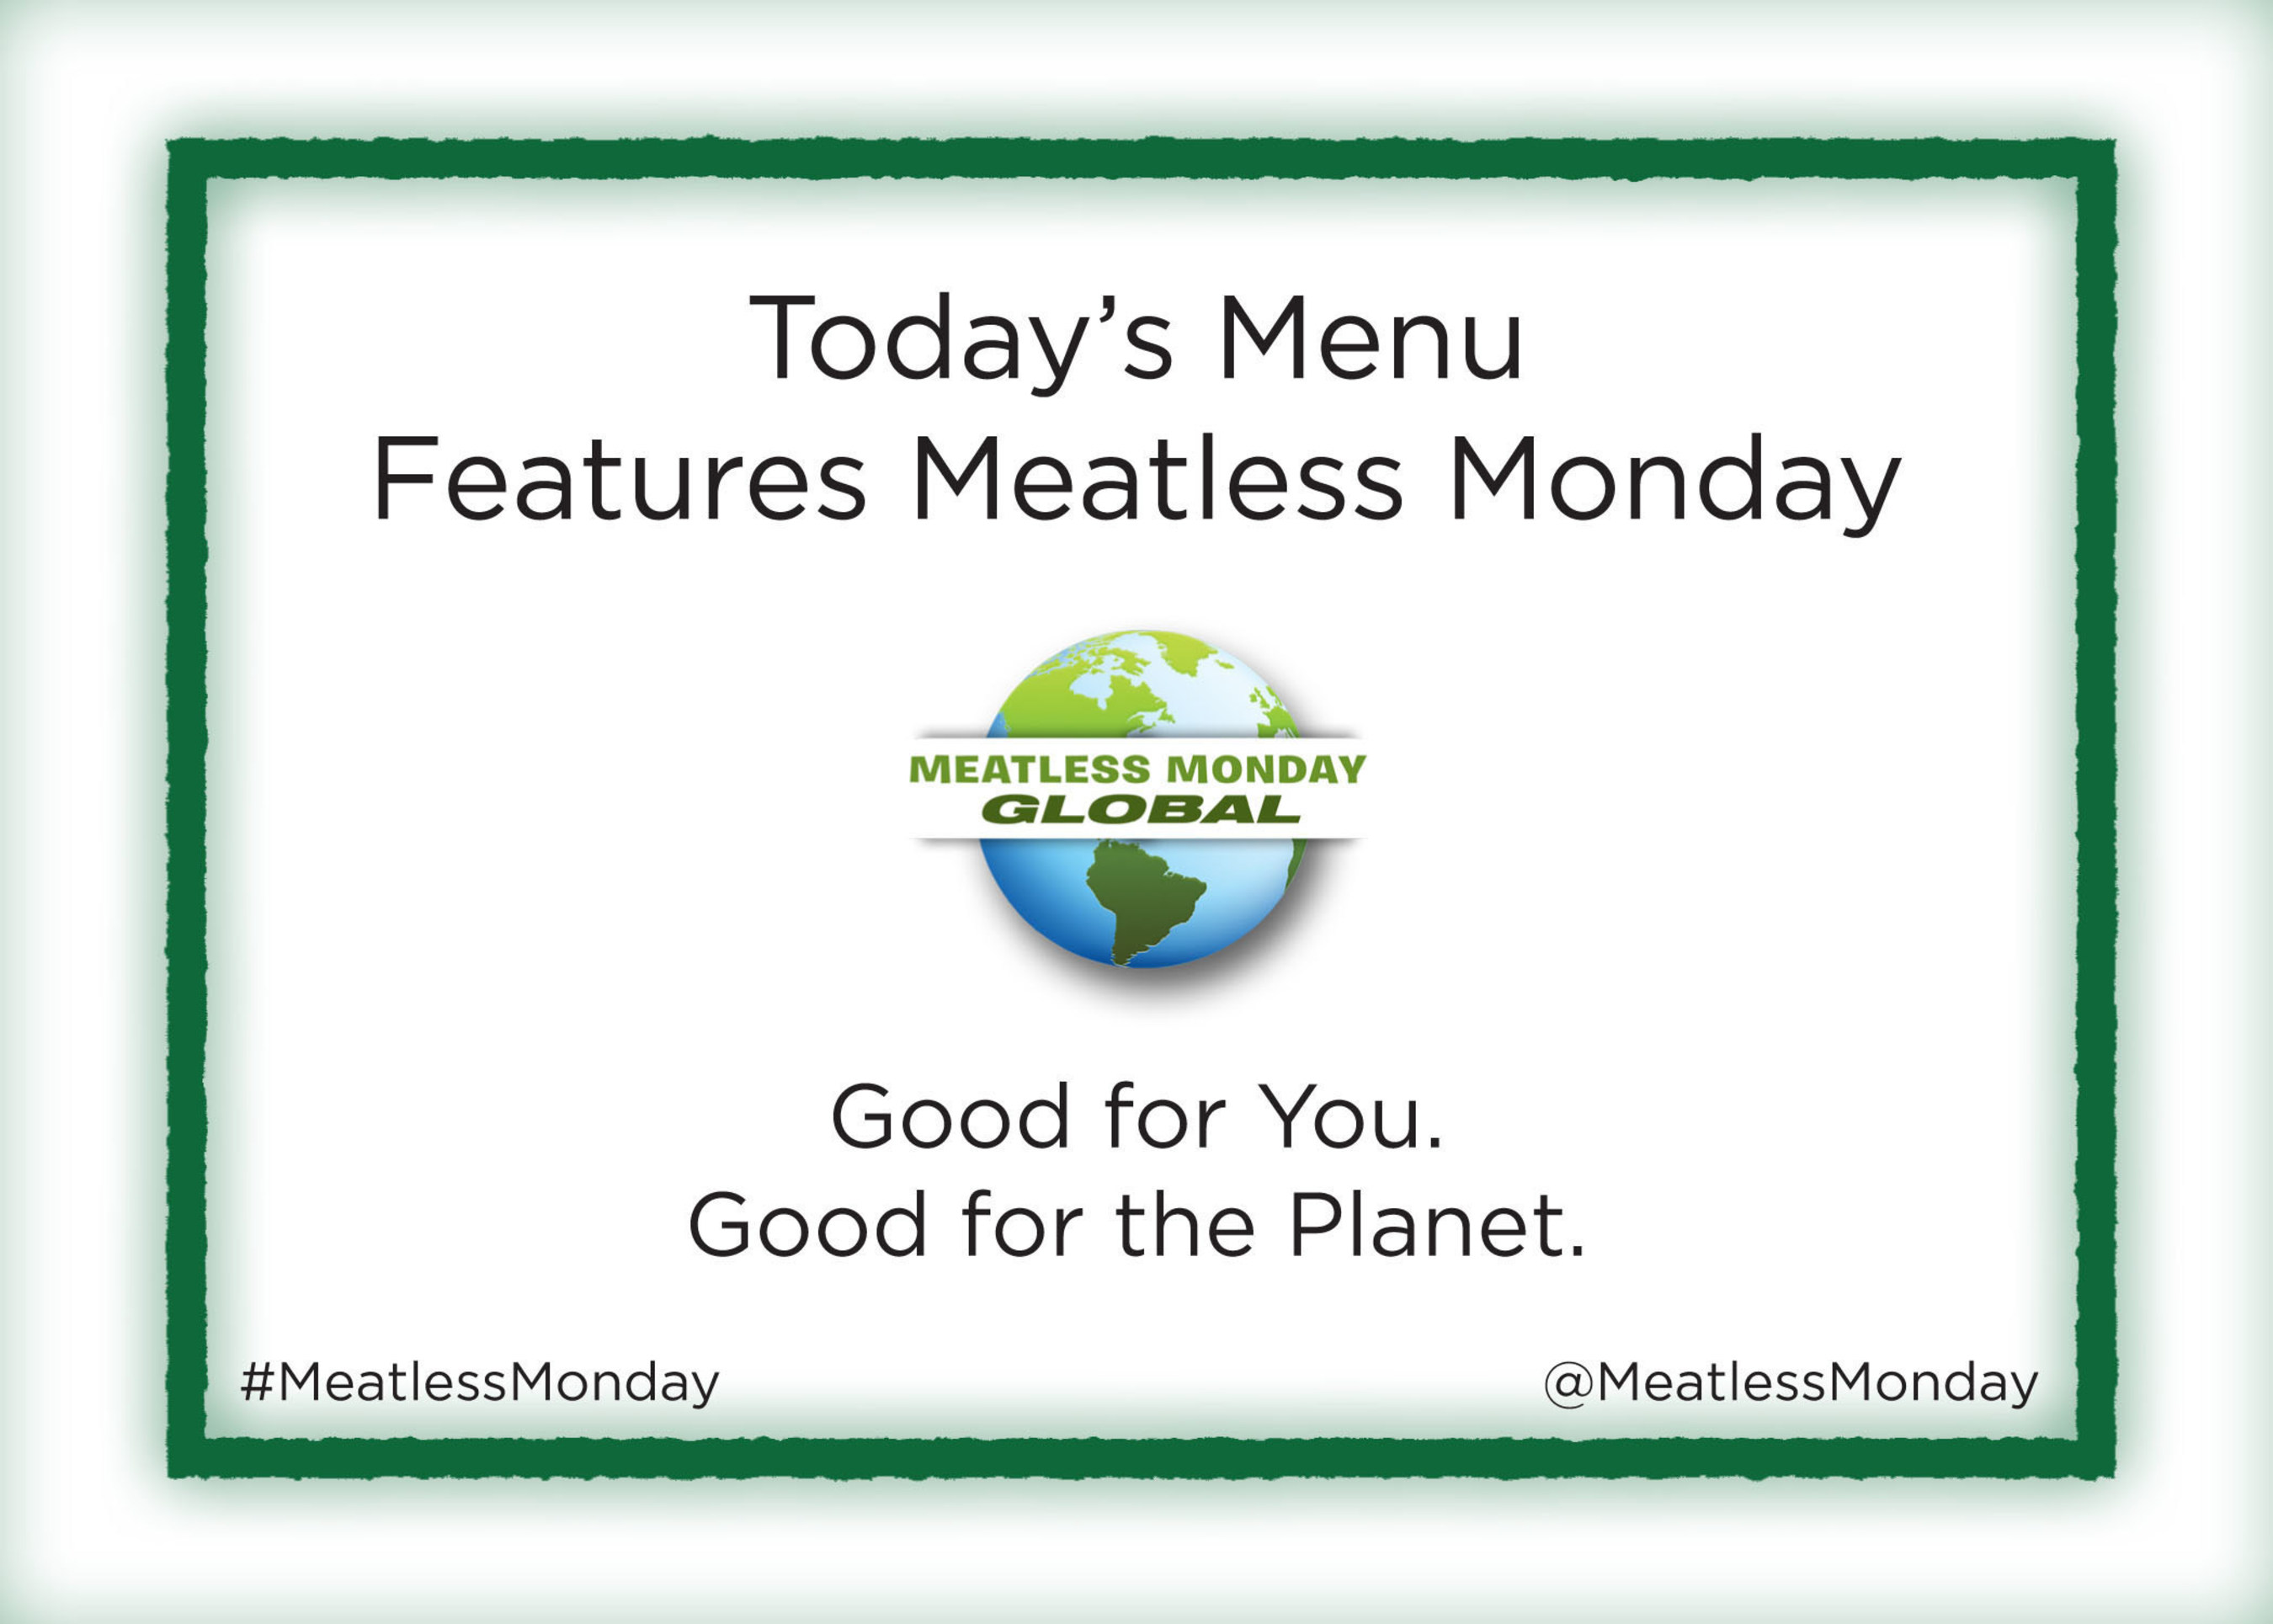 Thought leaders and decision makers will dine on a Meatless Monday menu at the World Health Summit 2016 (WHS) in Berlin, Germany.